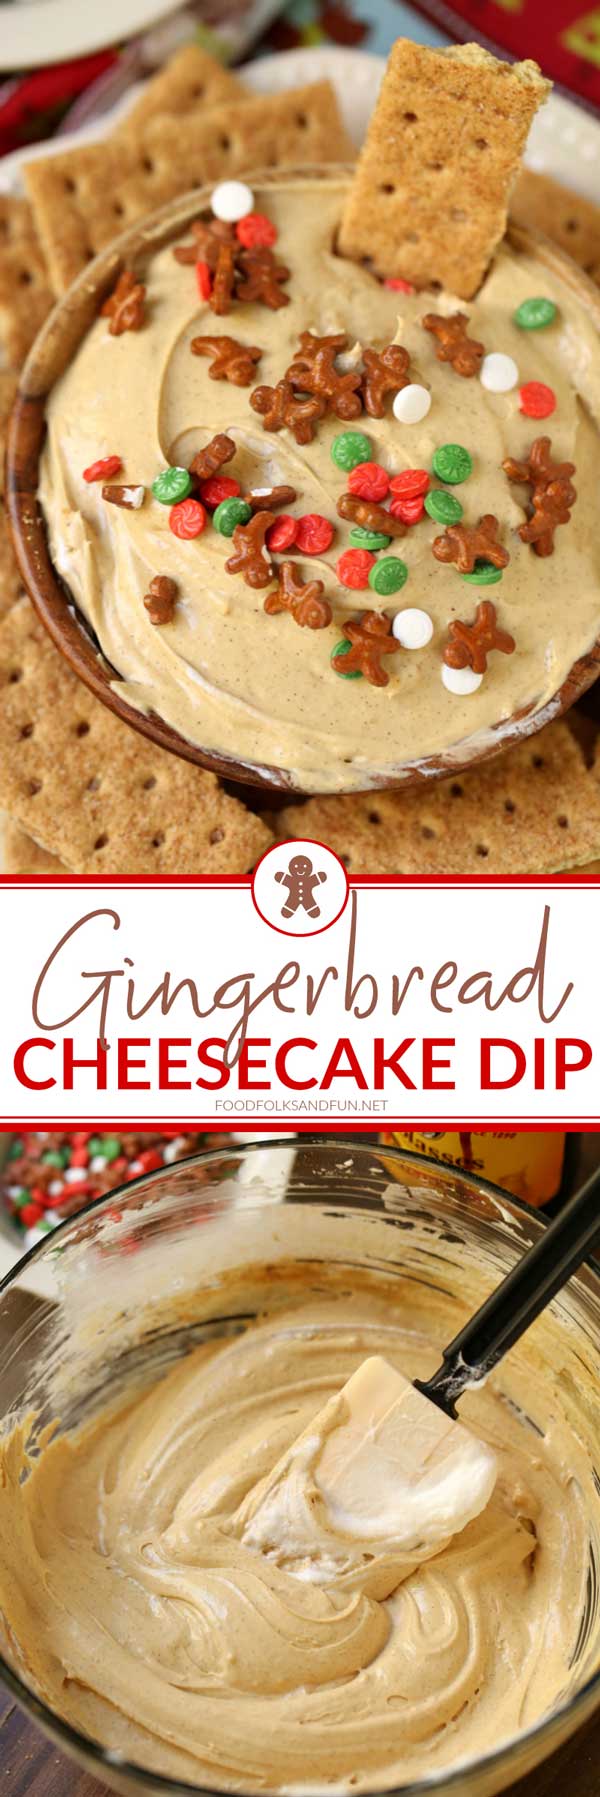 This Gingerbread Cheesecake Dip is always a party favorite for the holidays. Make it for your next holiday get together and I guarantee you'll be the most popular person in the room! via @foodfolksandfun